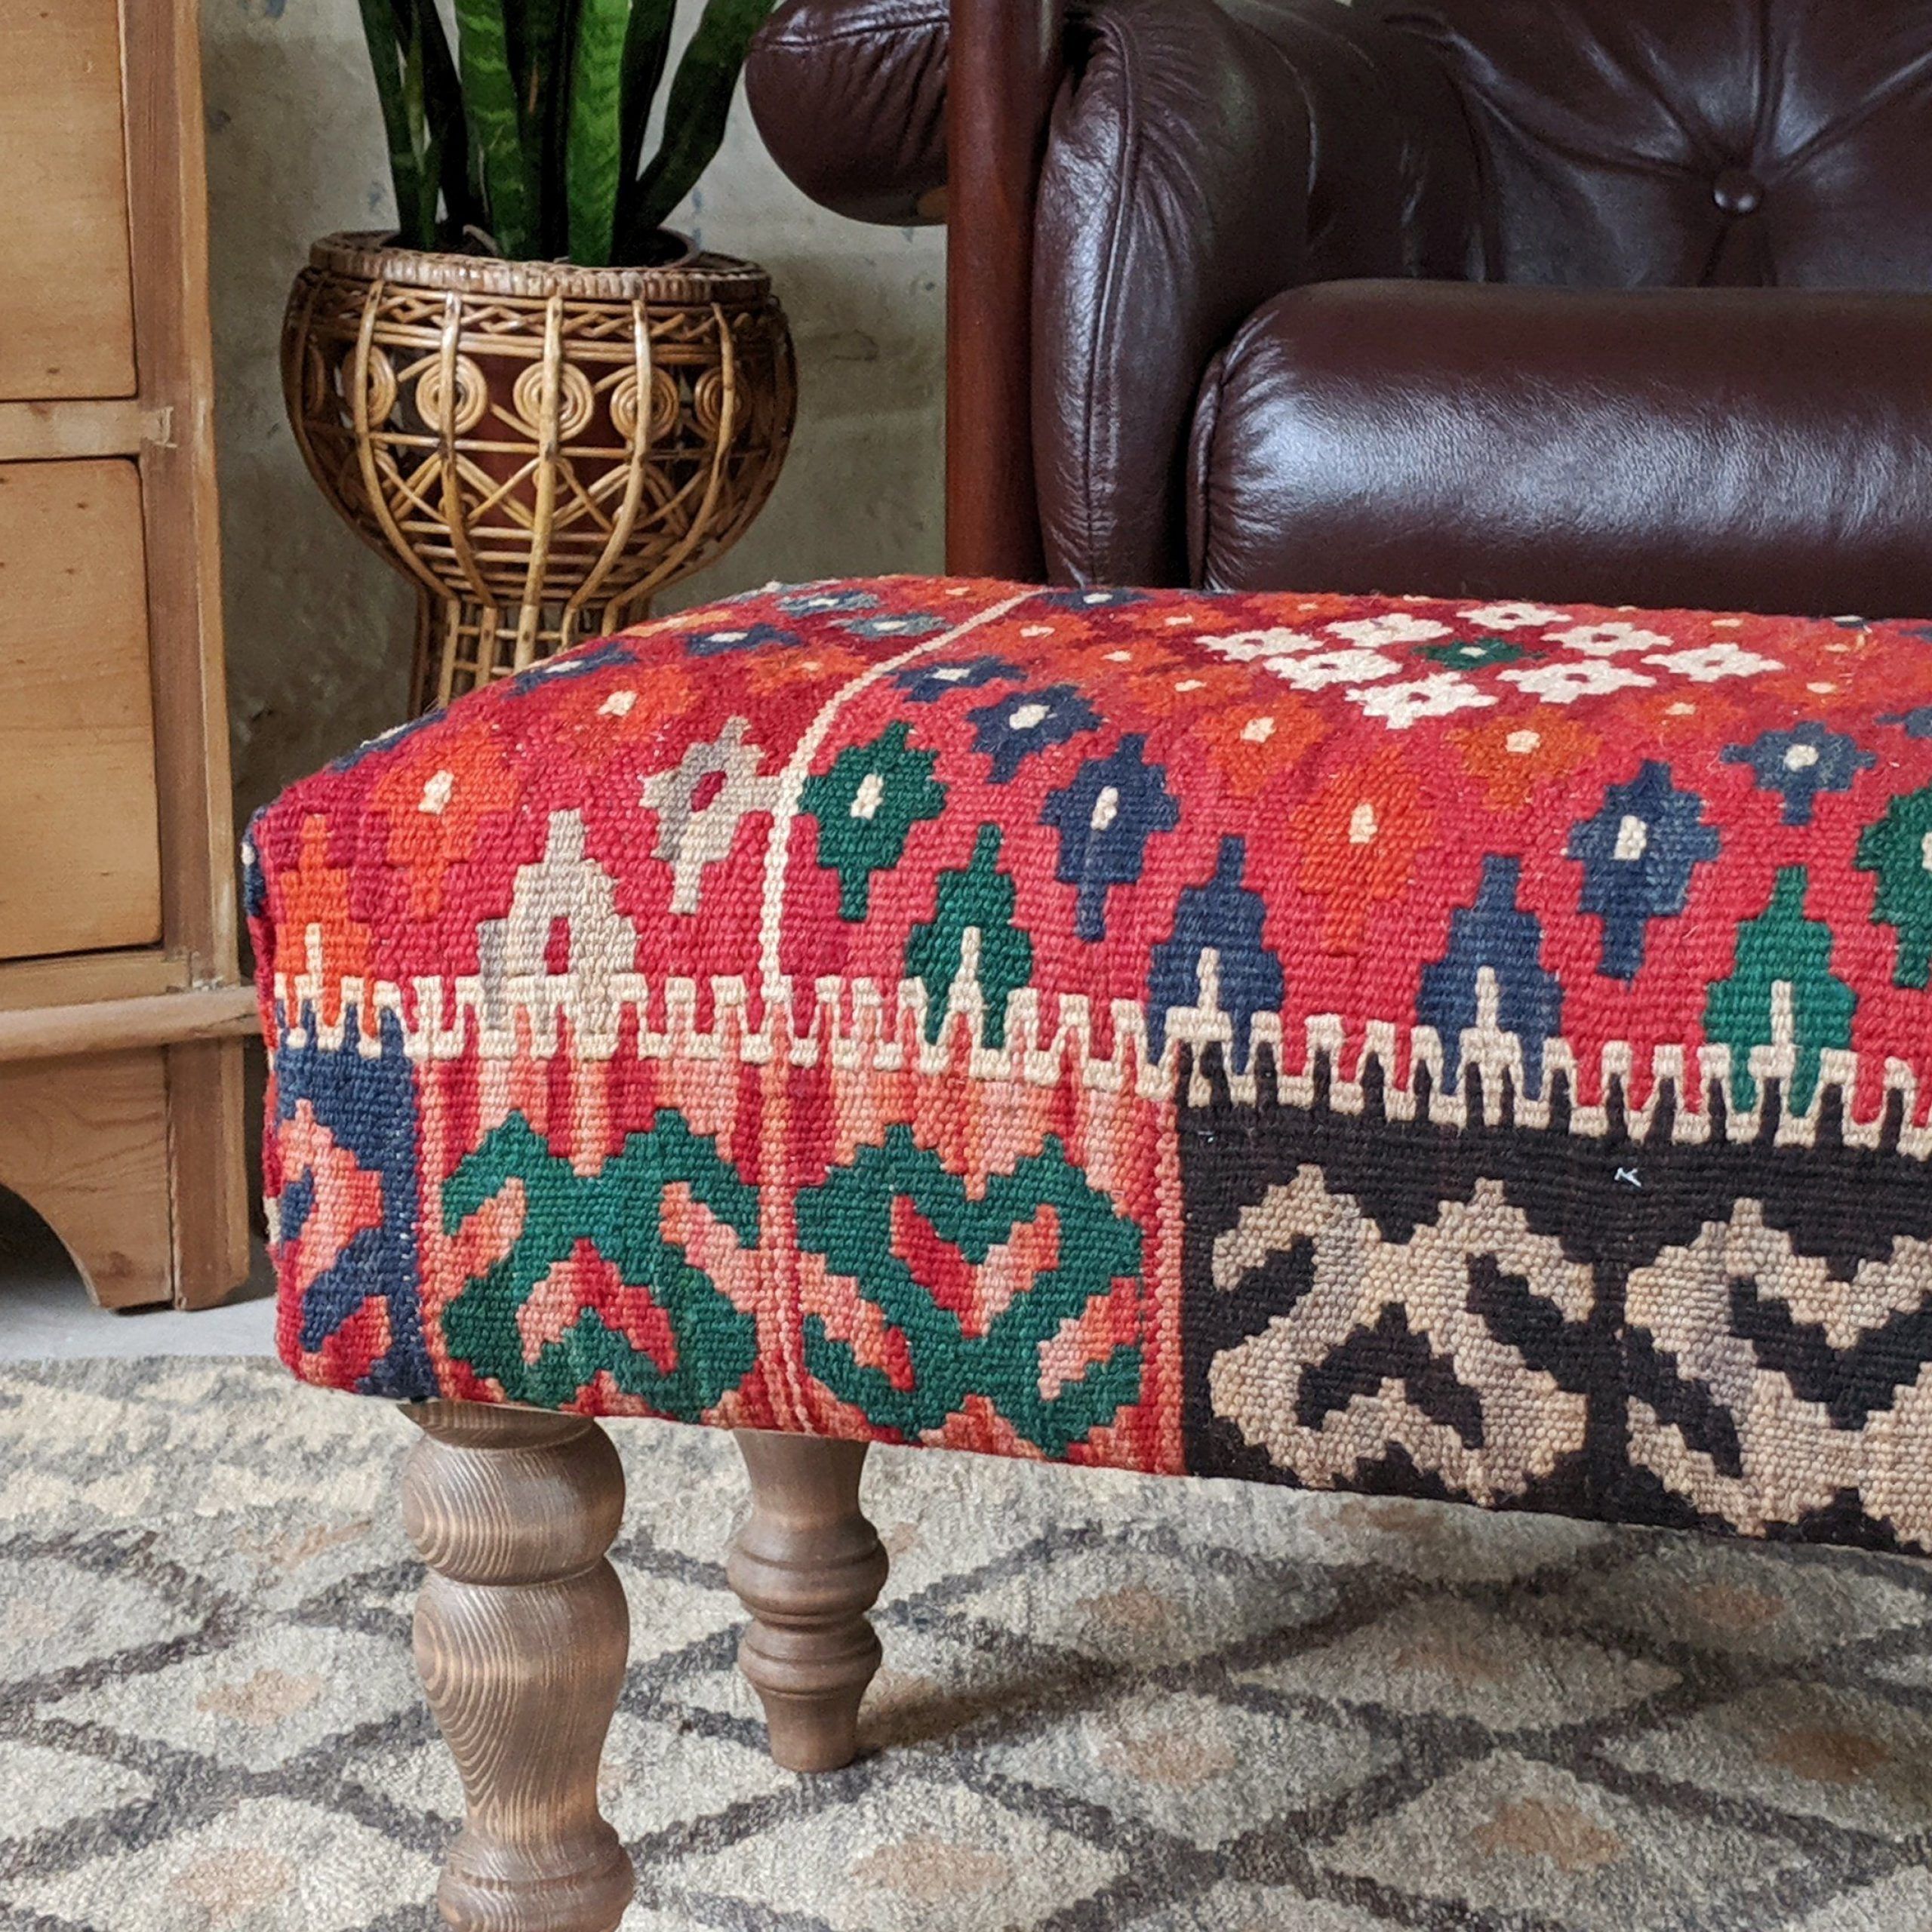 Stone Wool With Wooden Legs Ottomans Inside Newest Kilim Footstool – Handmade Red Kilim Wool Rug Ottoman Stool On Turned (View 8 of 10)